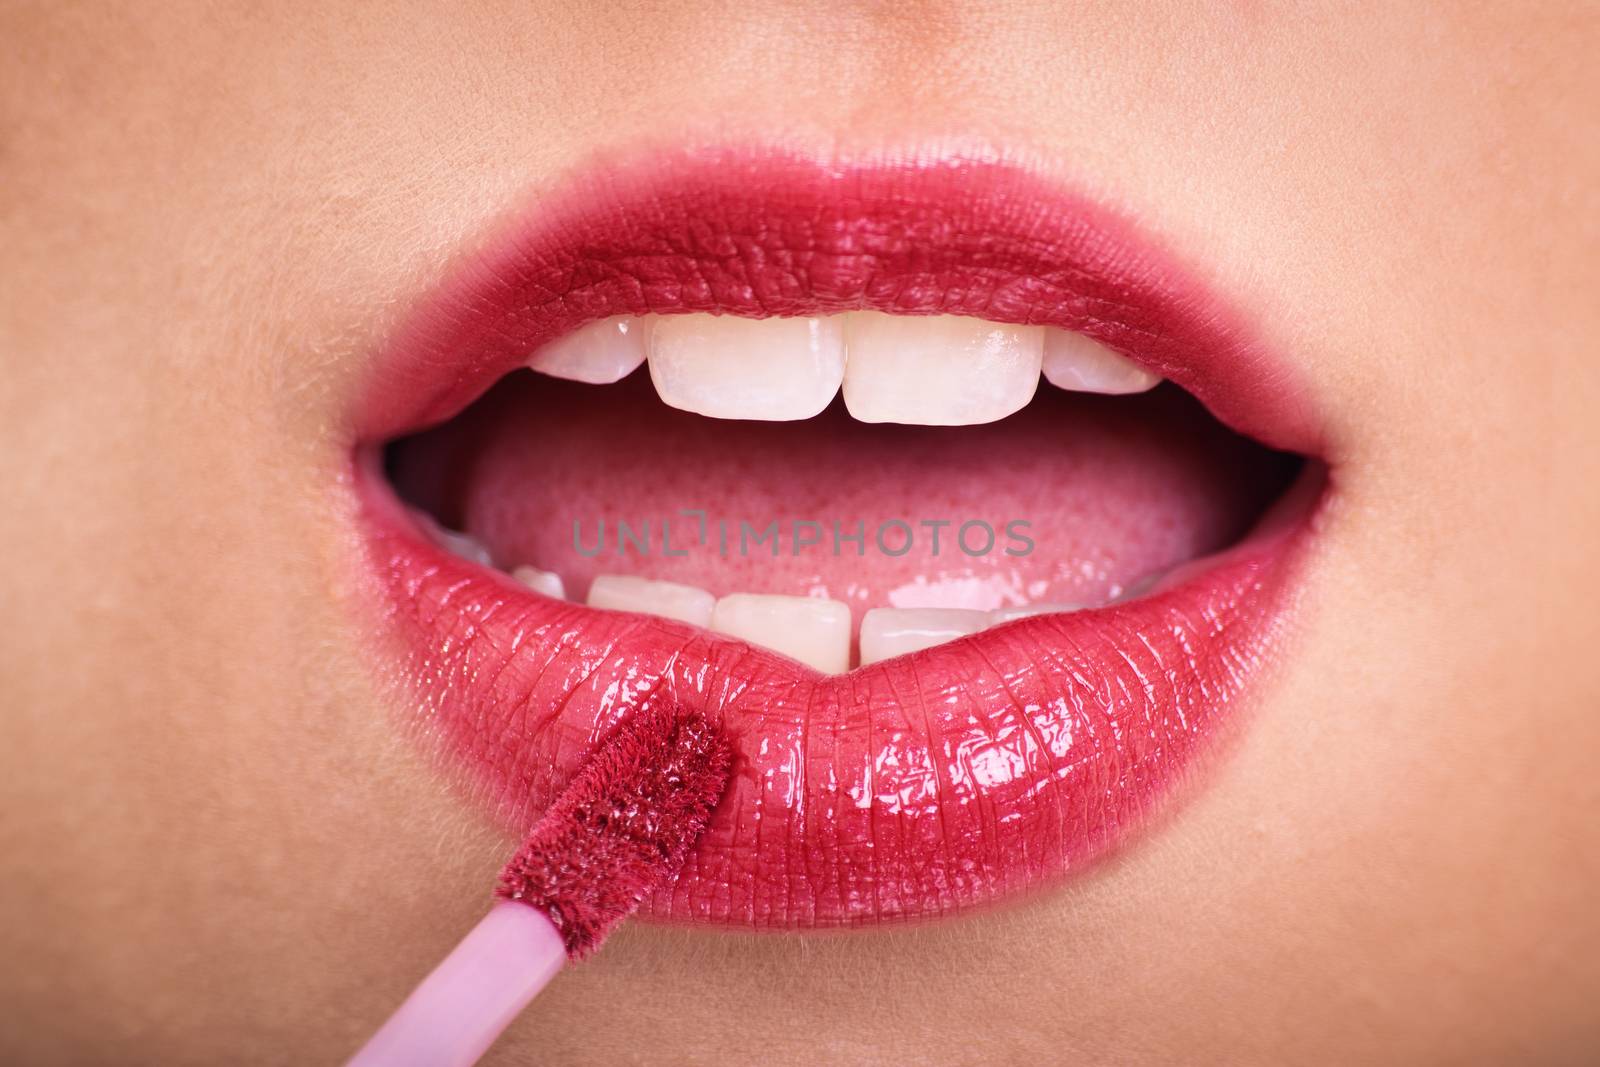 Cosmetics, makeup and skin care concept. Close up of woman applying lipstick or lip gloss to her plump pink lips.